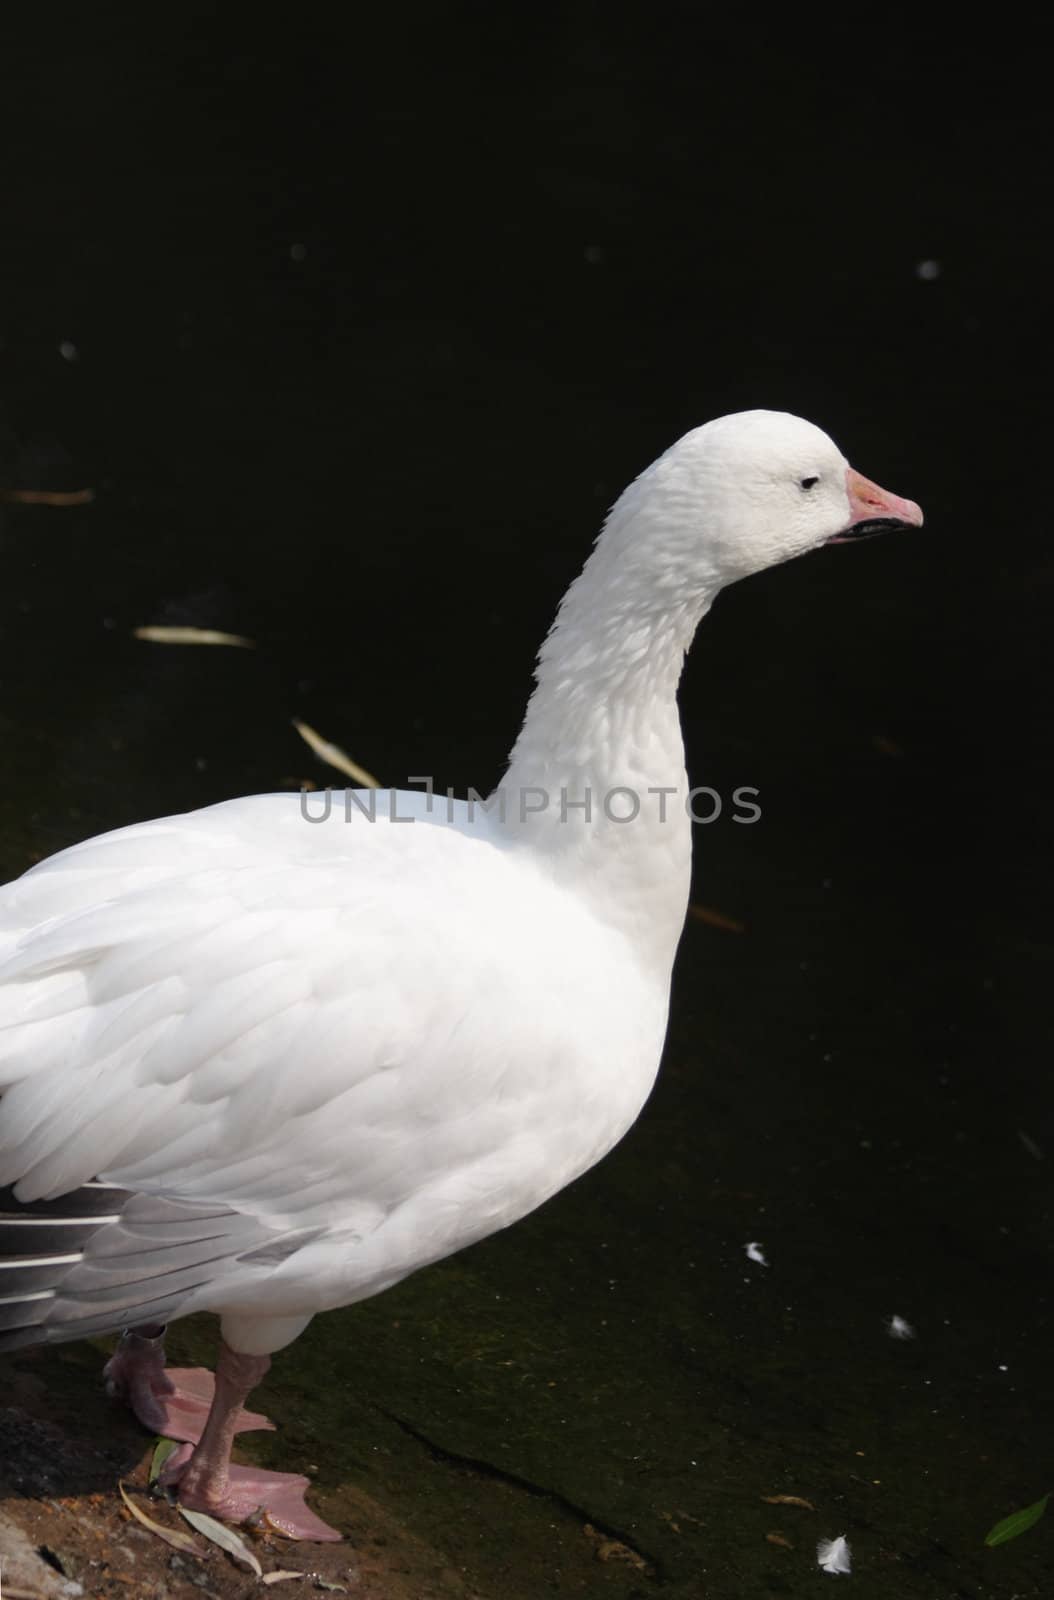 Close up of the white duck.